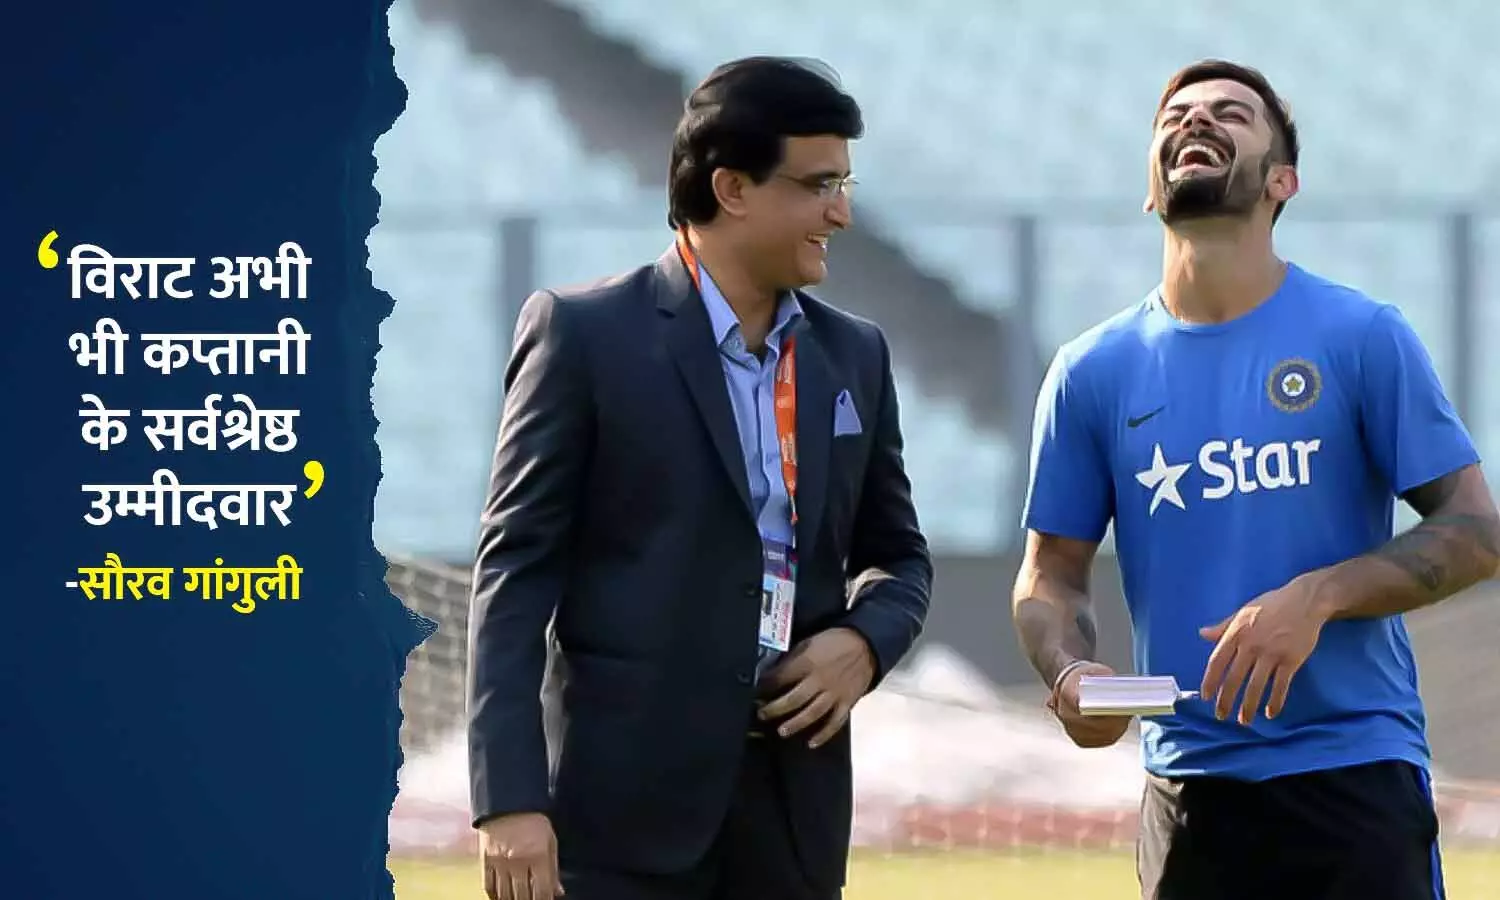 Virat is still the best candidate for team india captaincy says saurav ganguly after defeat in wtc